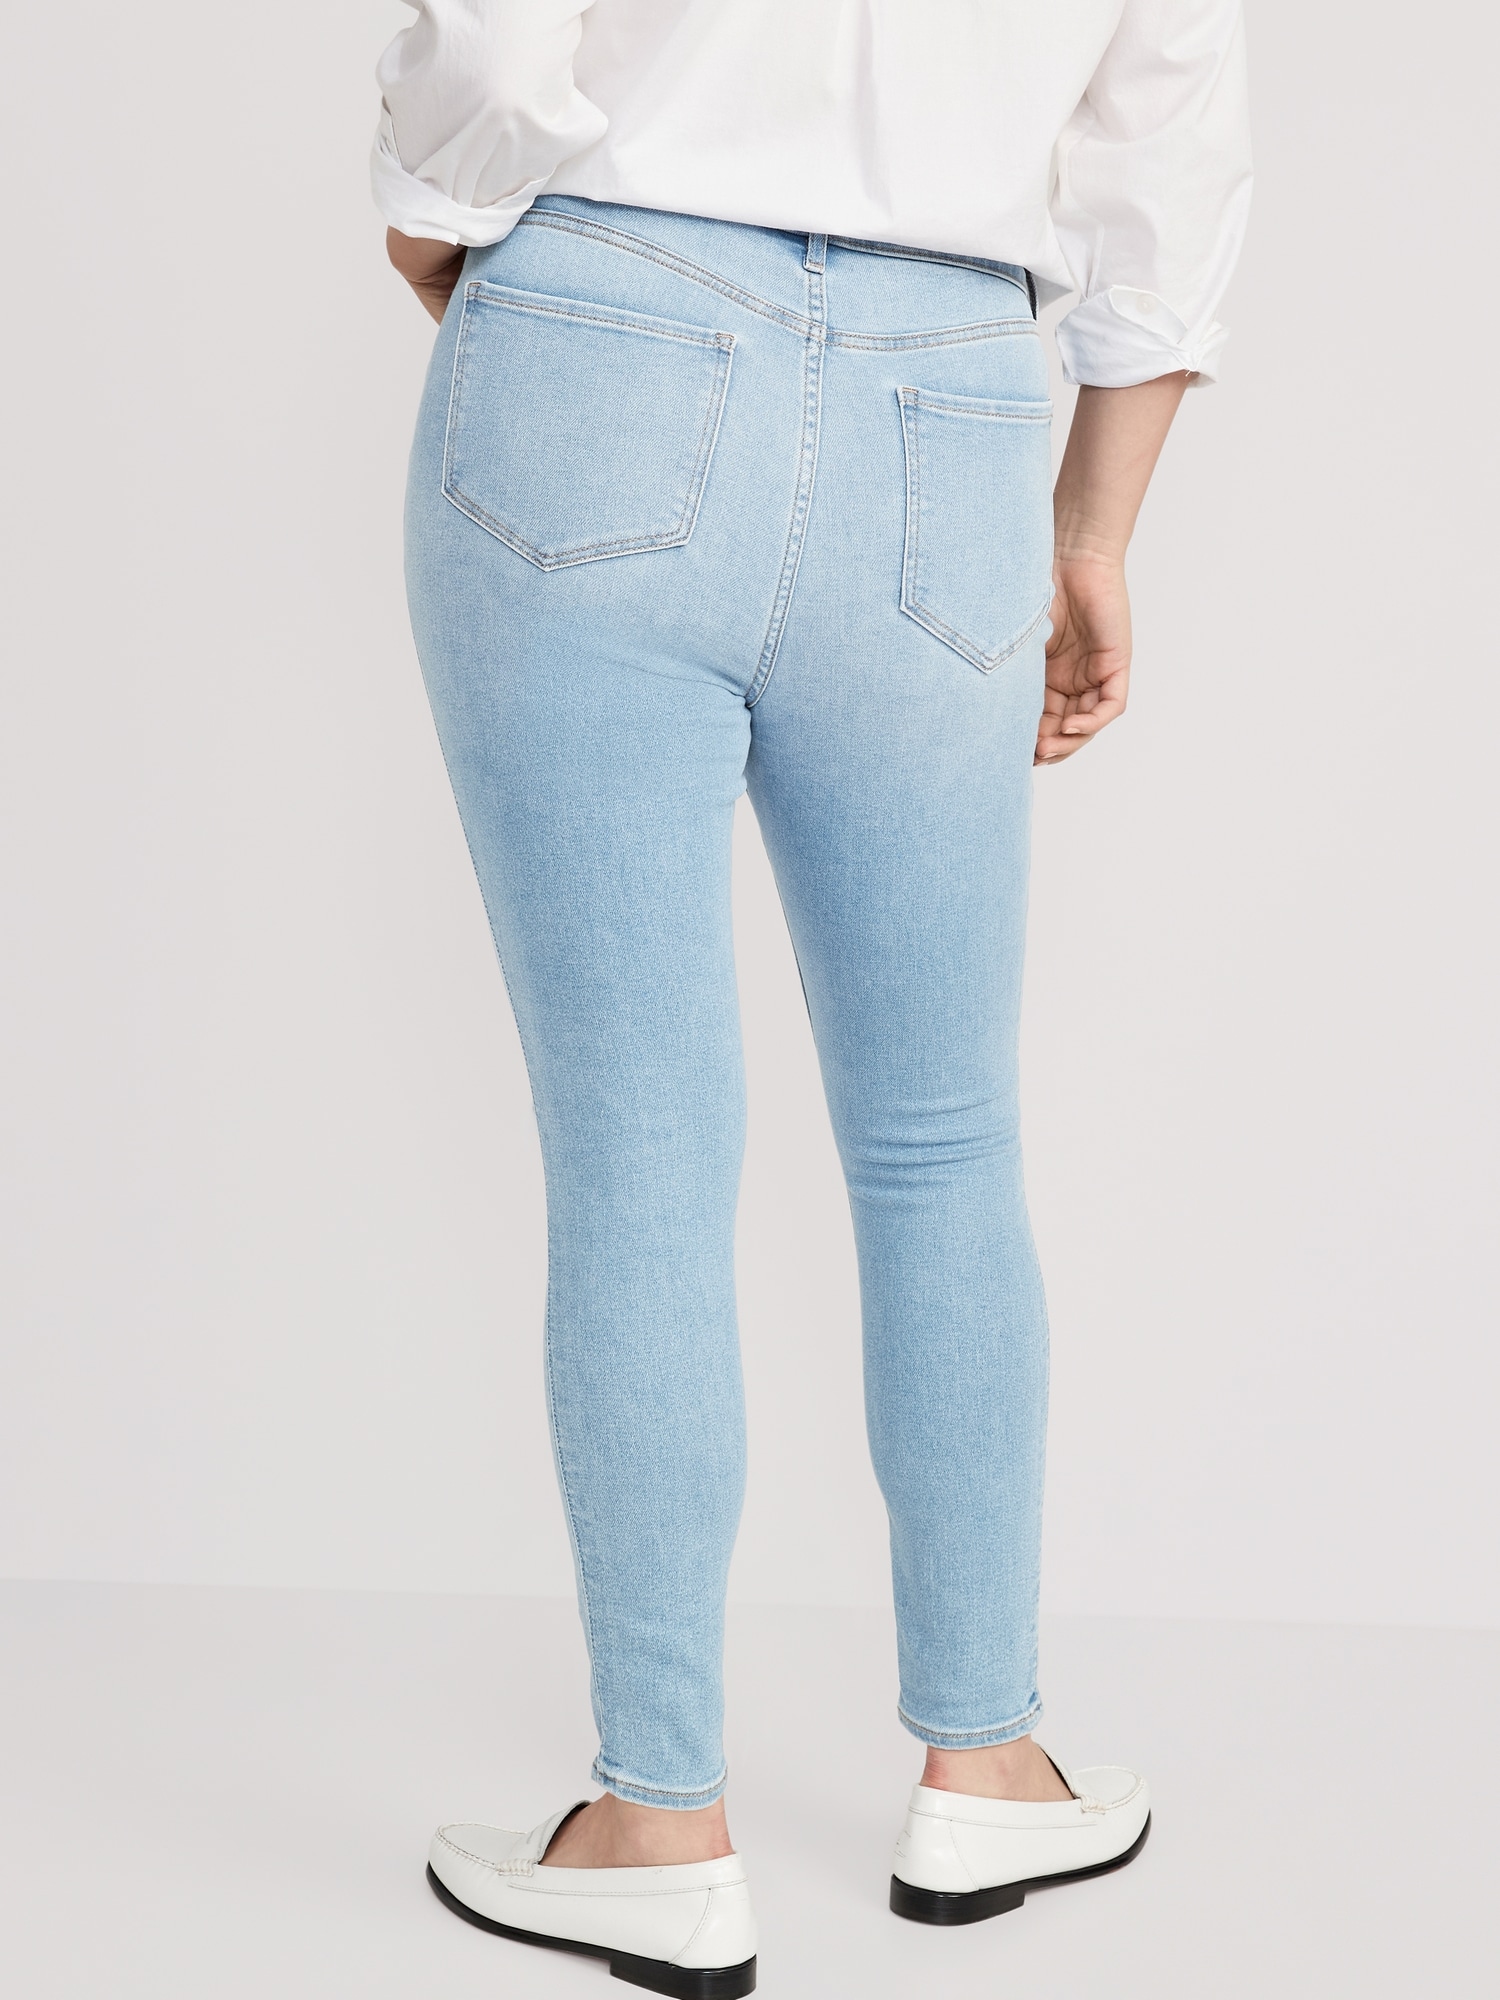 Extra High-Waisted Rockstar 360° for | Women Jeans Super-Skinny Old Stretch Navy